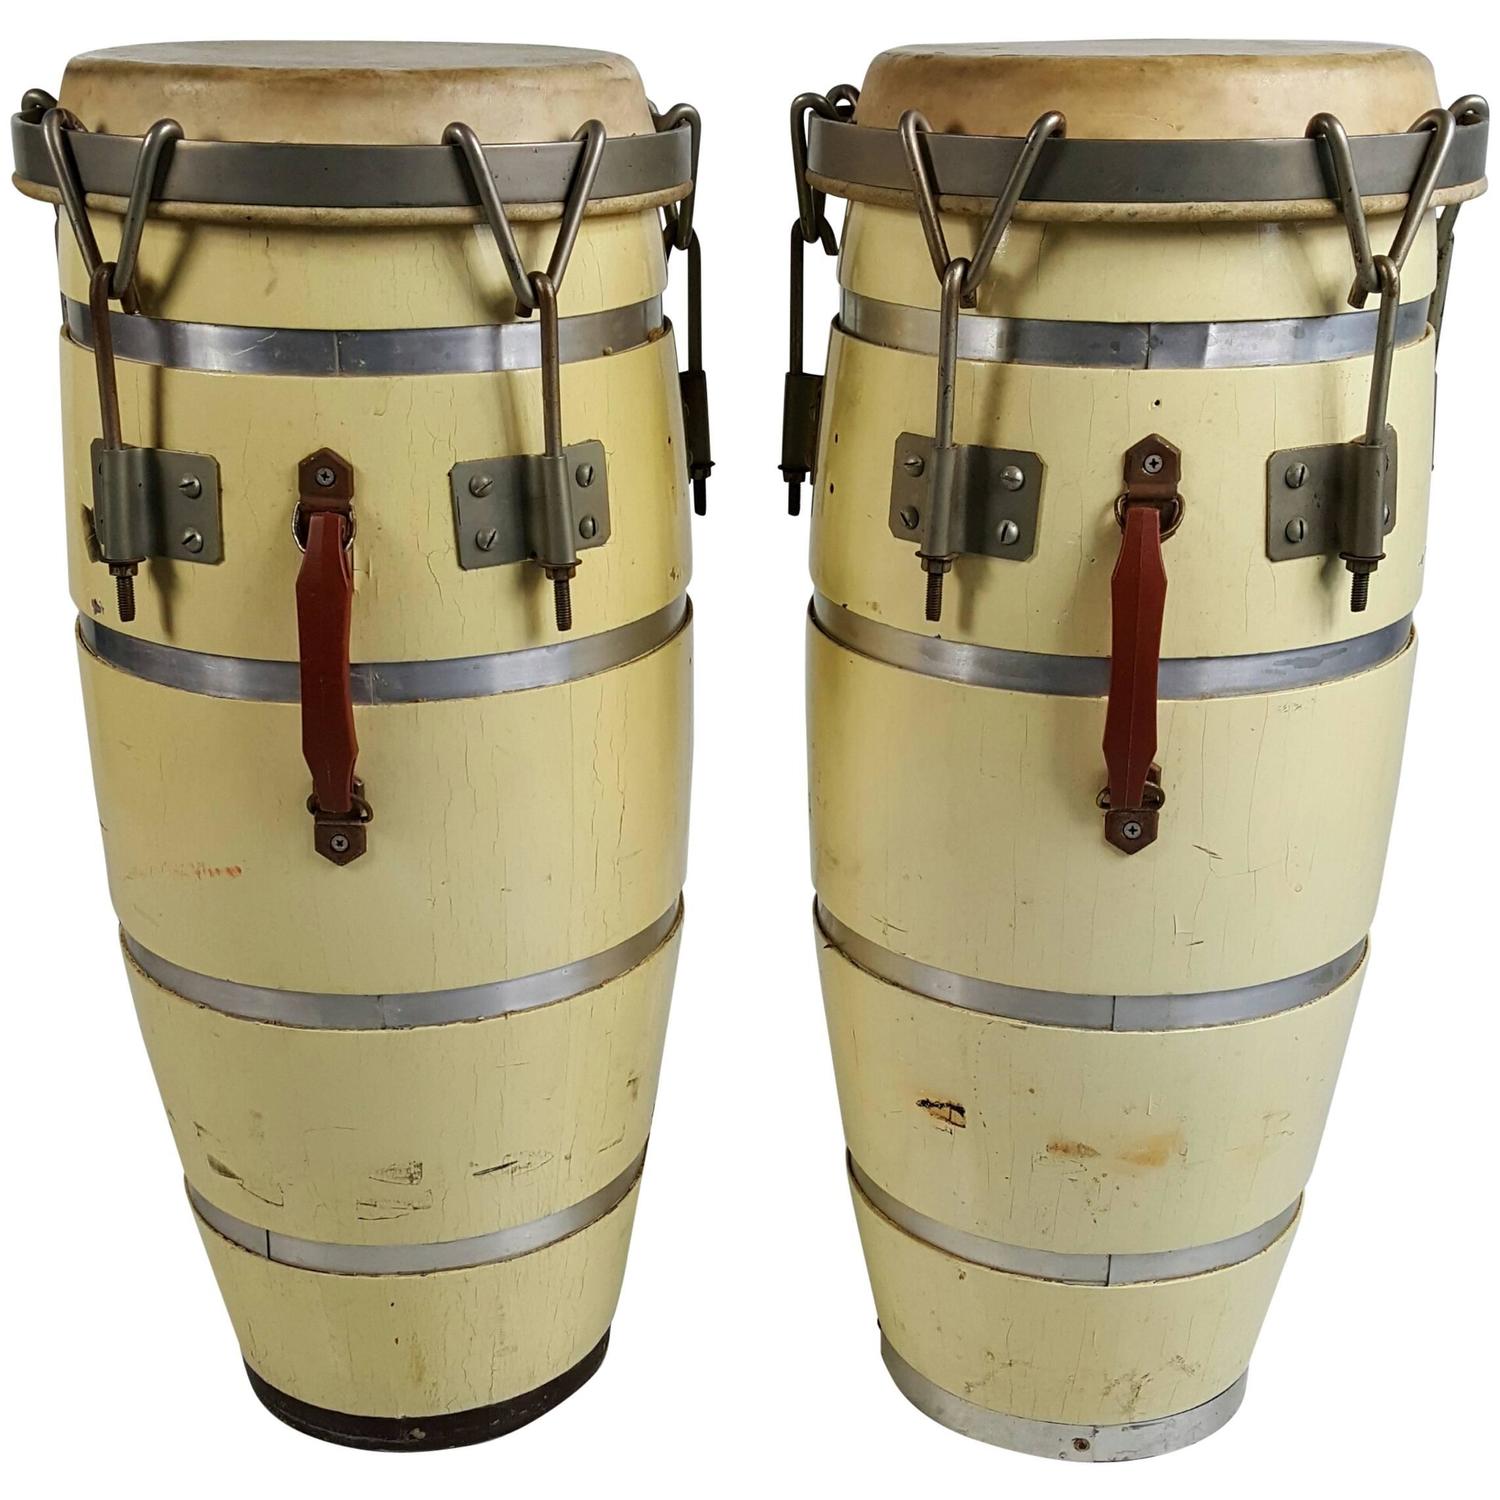 Pair Midcentury Cuban Conga Drums For Sale at 1stdibs